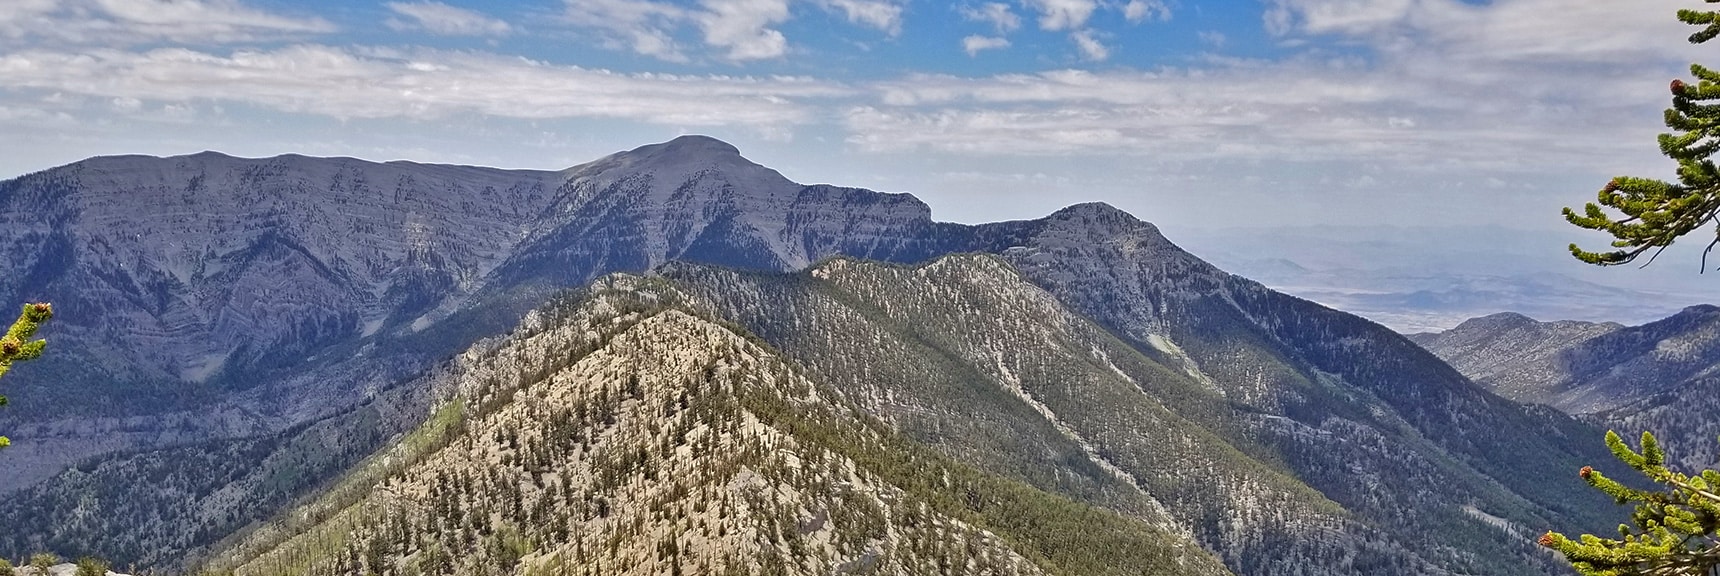 North and South Ridge of Kyle Canyon with Lee Peak and Charleston Peak in the Distance | Mummy Mountain NW Cliffs | Mt Charleston Wilderness | Spring Mountains, Nevada